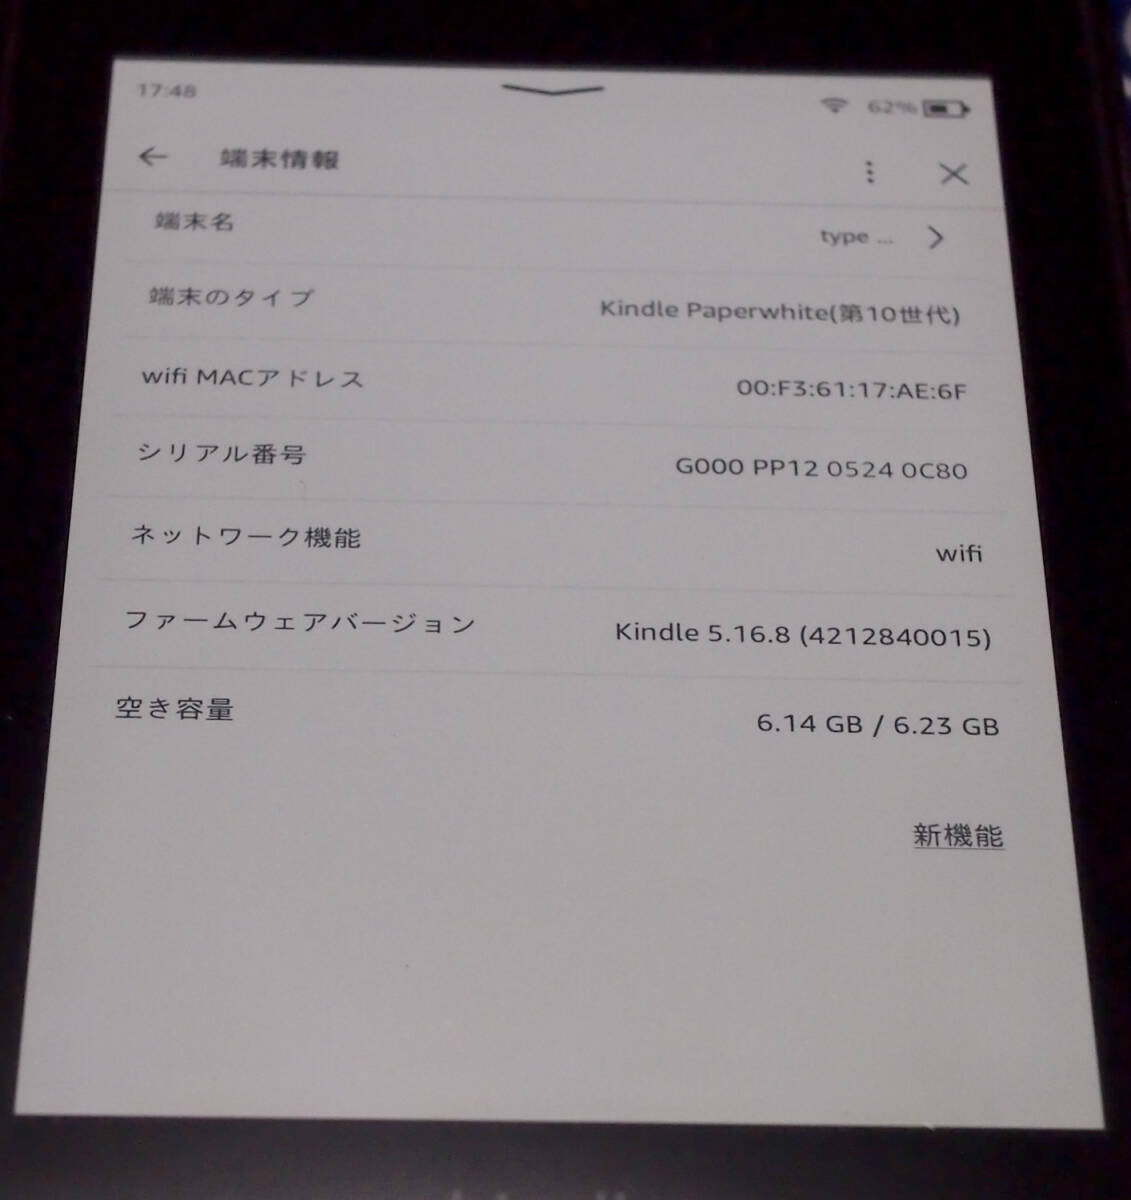 Kindle Paperwhite waterproof function installing no. 10 generation model wifi 8GB black advertisement none model secondhand goods case attaching 